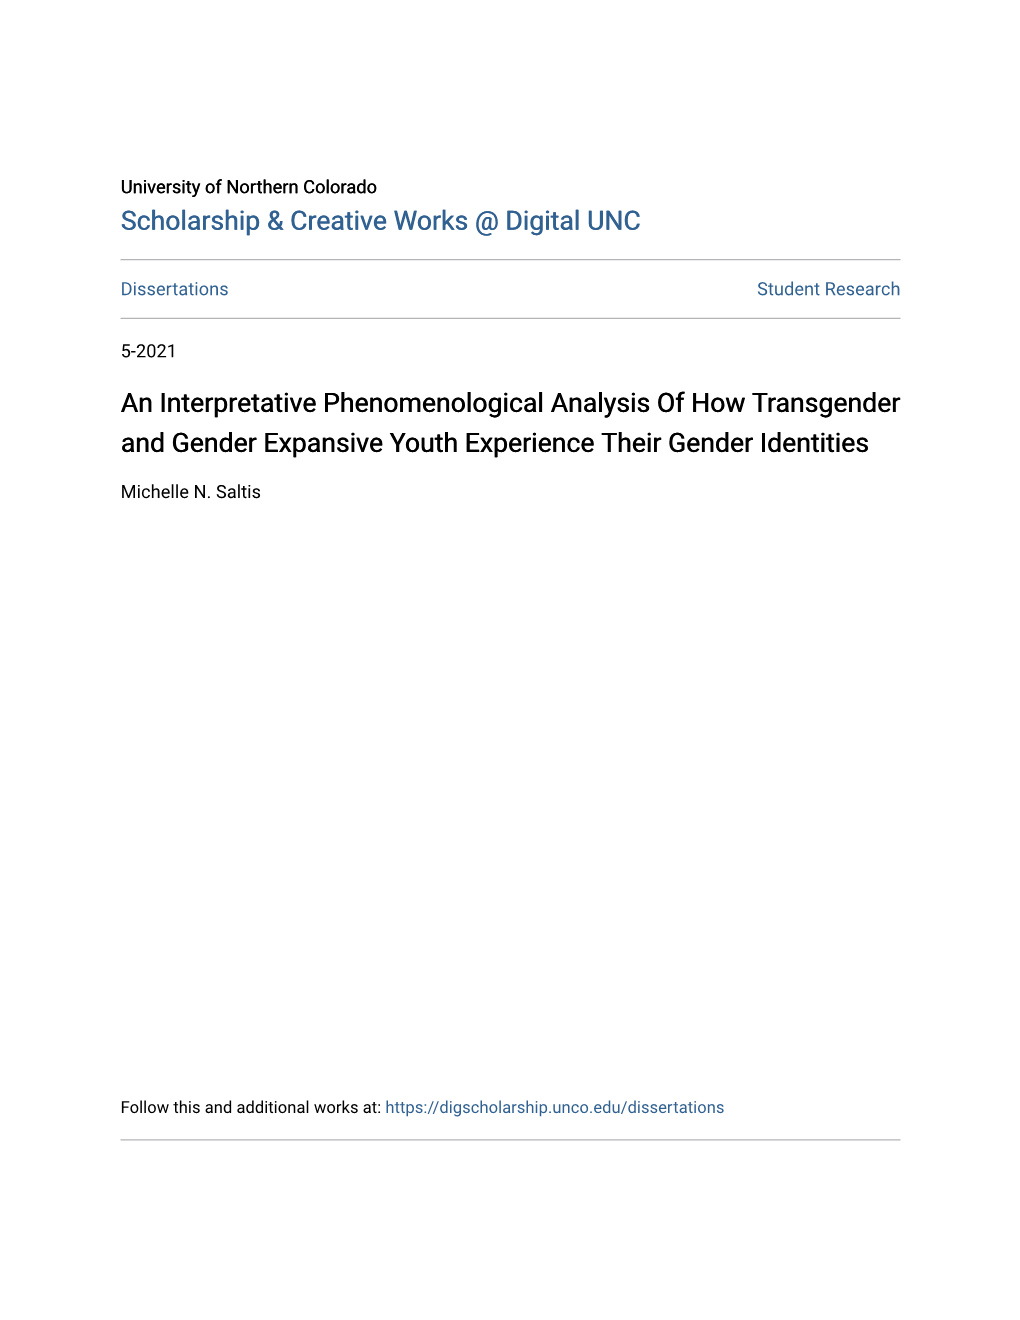 An Interpretative Phenomenological Analysis of How Transgender and Gender Expansive Youth Experience Their Gender Identities